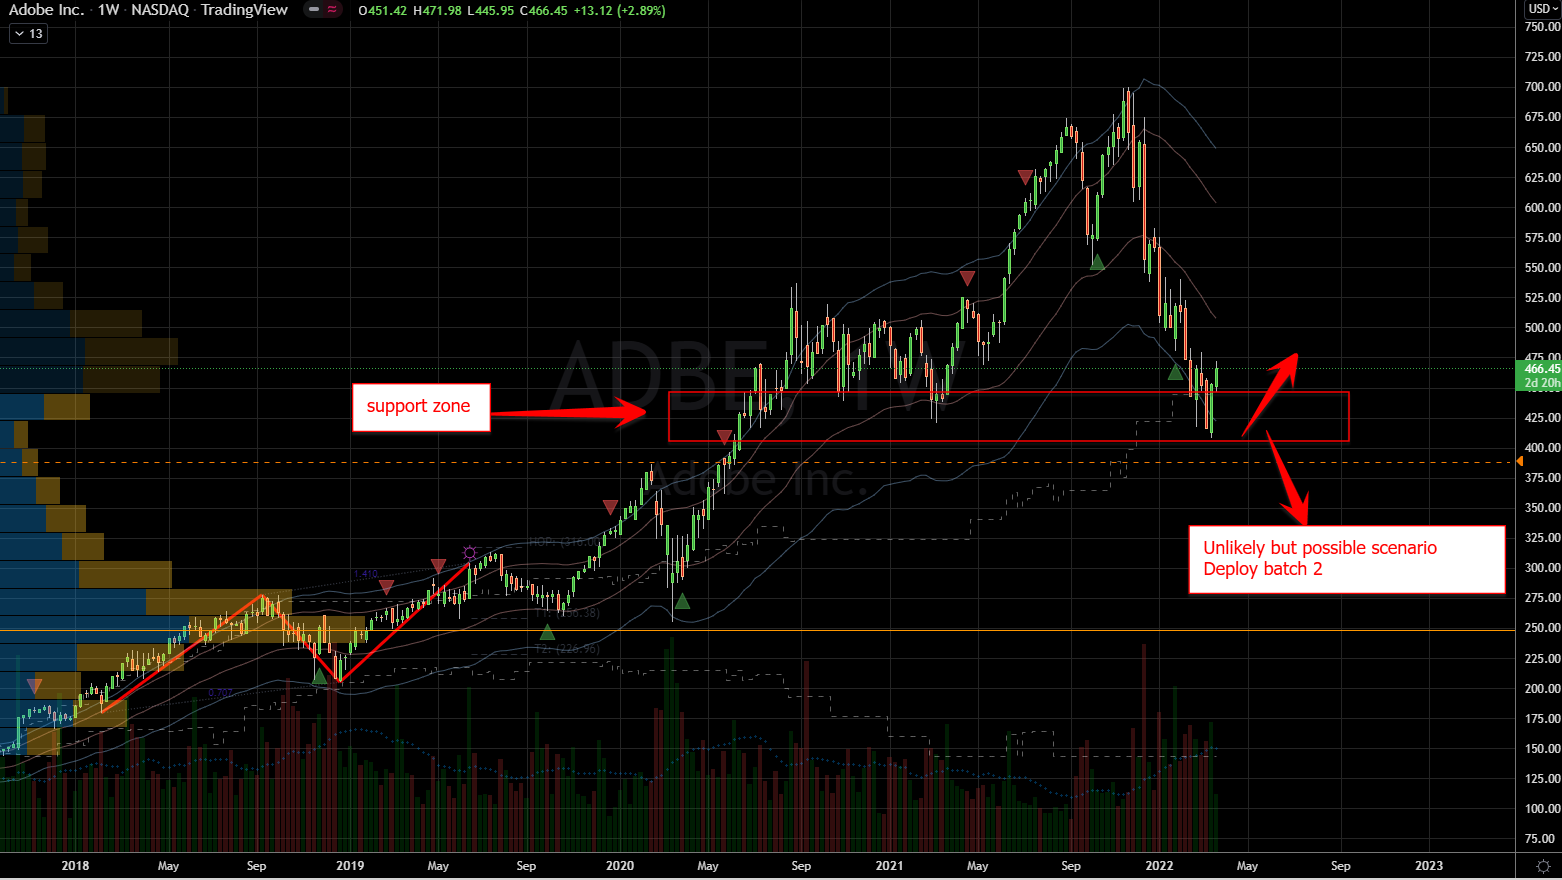 Adobe (ADBE) Stock Chart Showing Potential Support